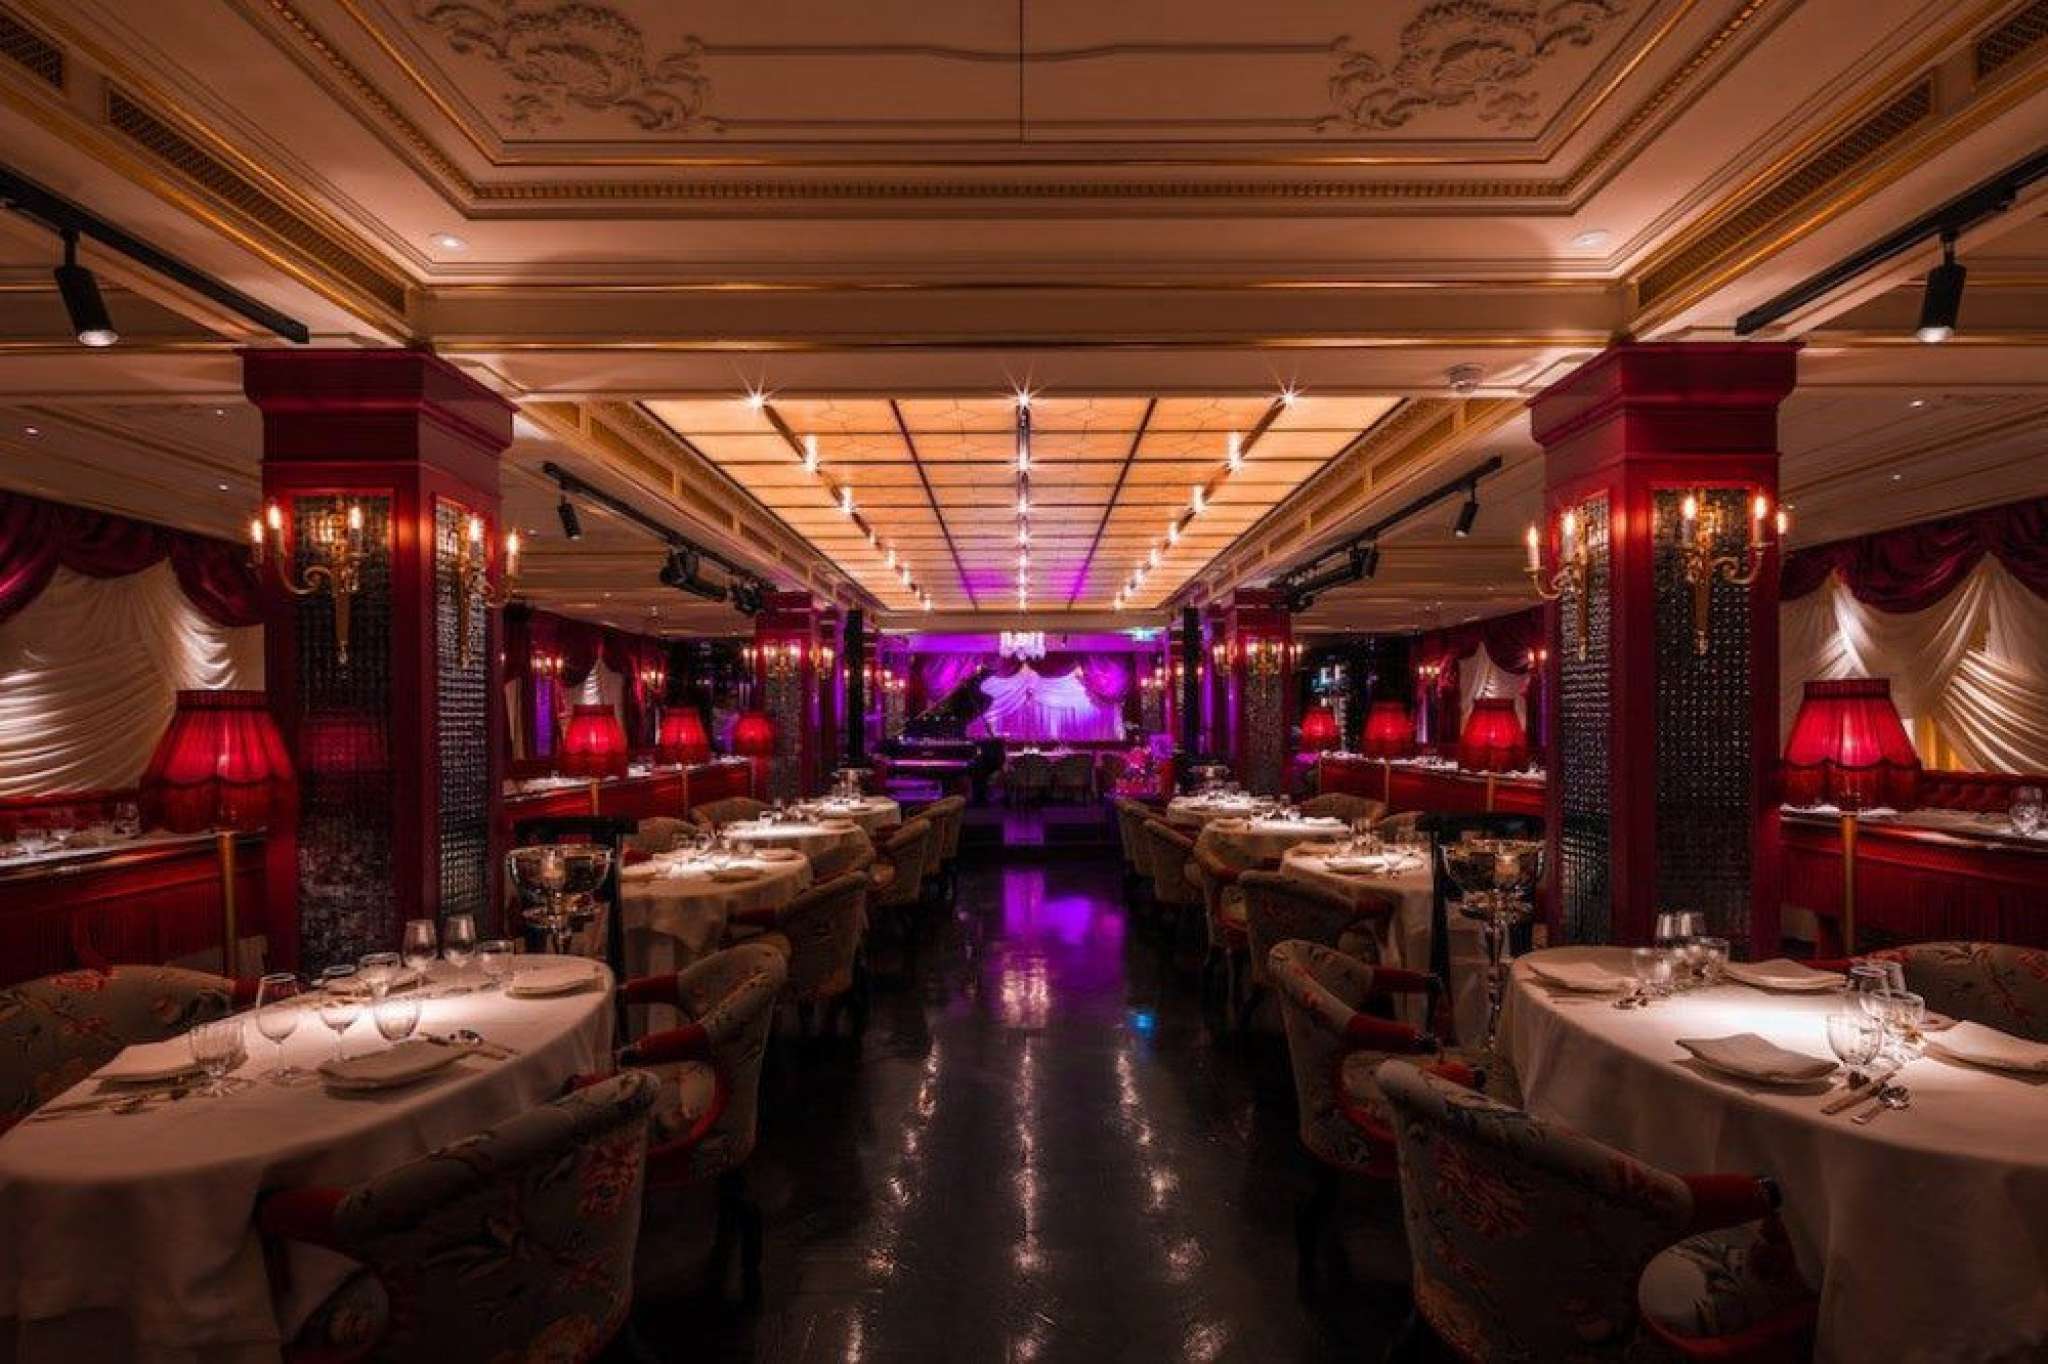 Park chinois private dining image e1518189046810.